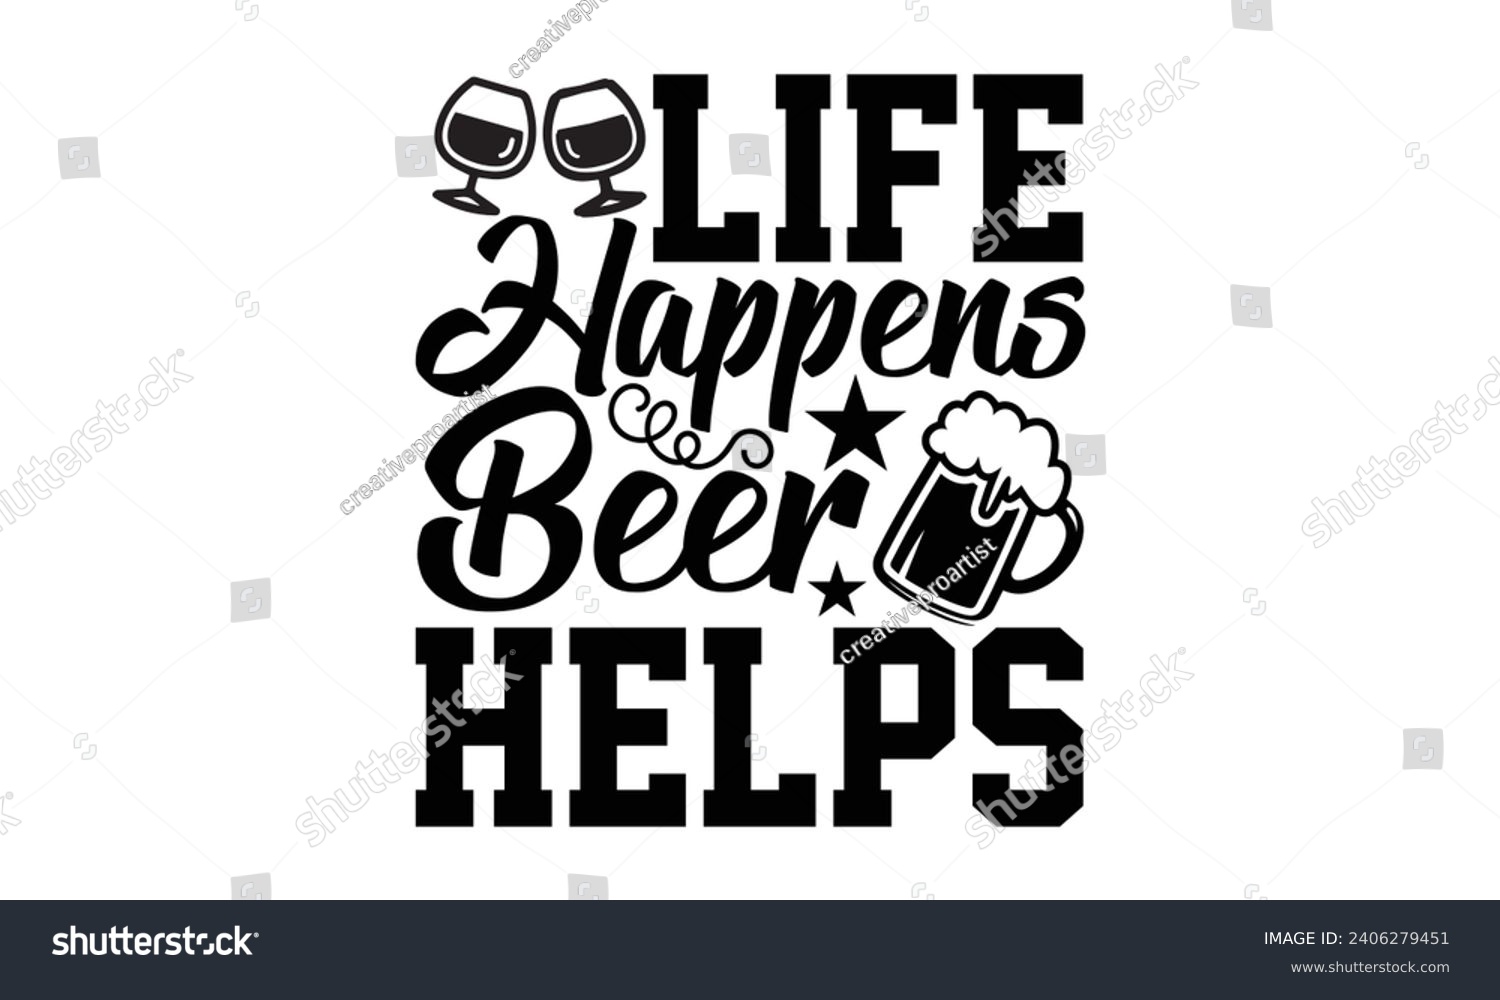 SVG of Life Happens Beer Helps- Beer t- shirt design, Handmade calligraphy vector illustration for Cutting Machine, Silhouette Cameo, Cricut, Vector illustration Template. svg